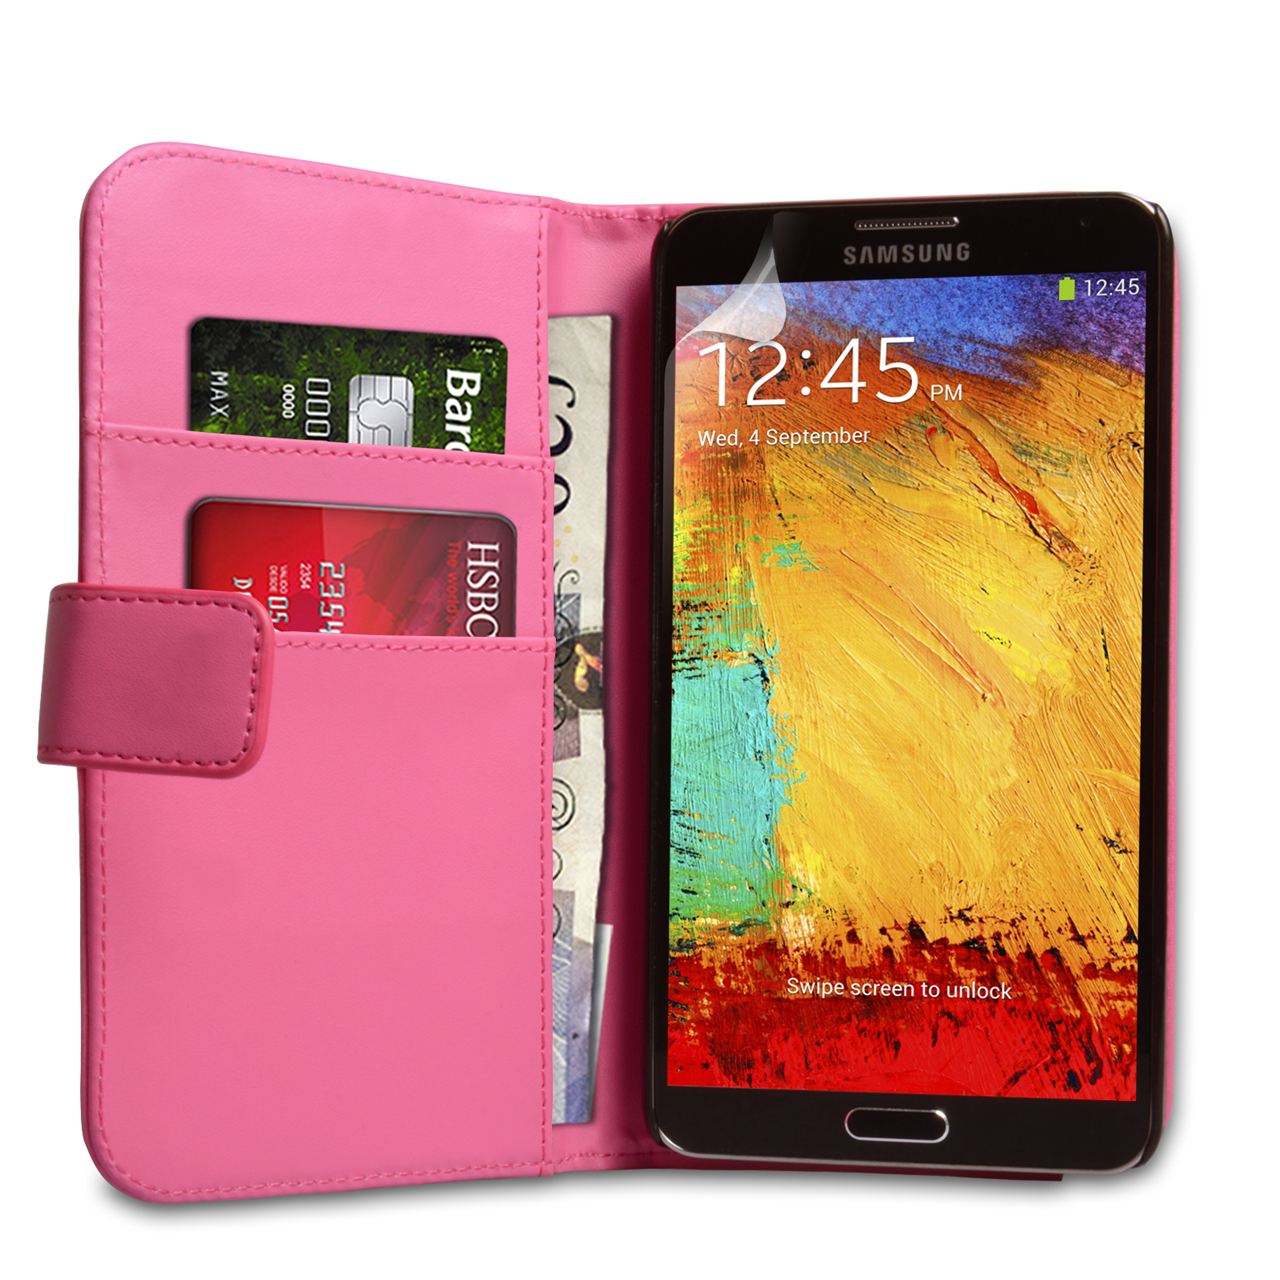 Samsung Galaxy Note 3 Cases | Mobile Madhouse